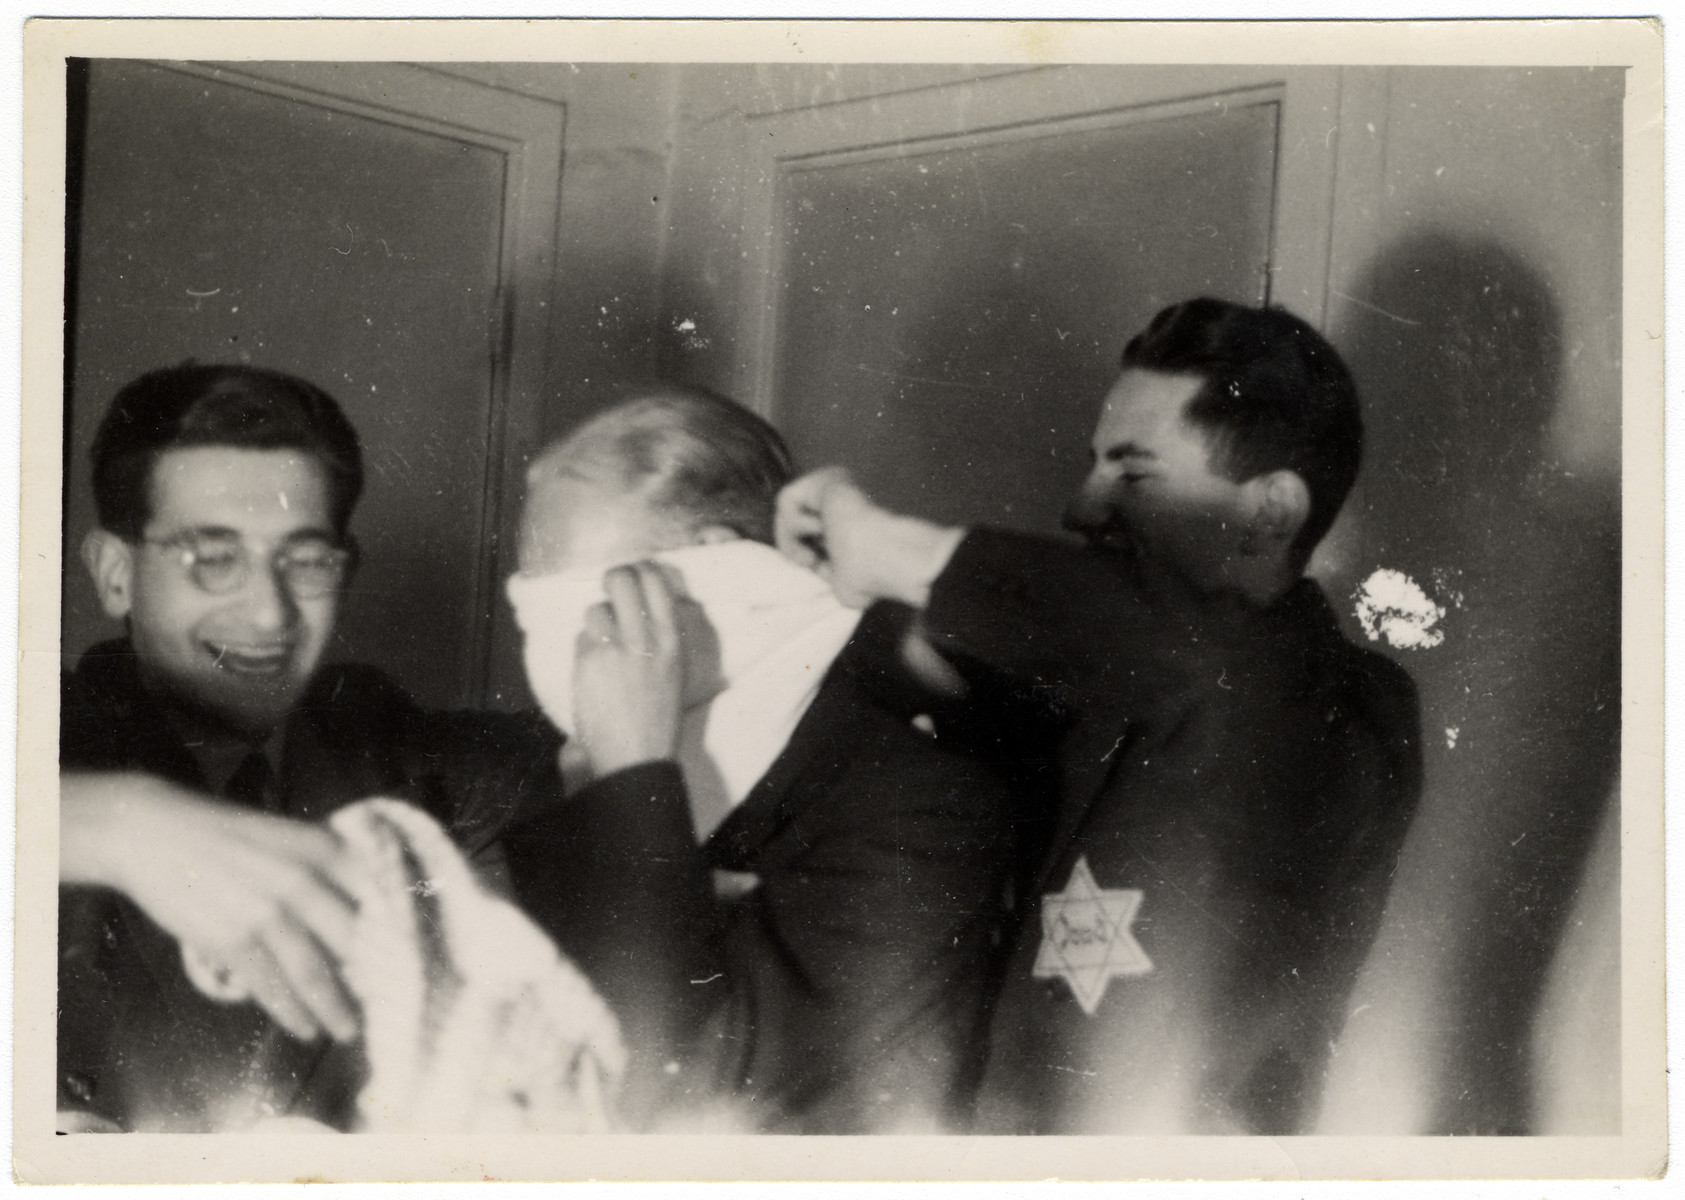 Jewish teenagers play a game with a blindfold at a party hosted by Rudy Acohen (left).

Shortly thereafter he was arrested in a reprisal action and sent to Auschwitz where he perished.